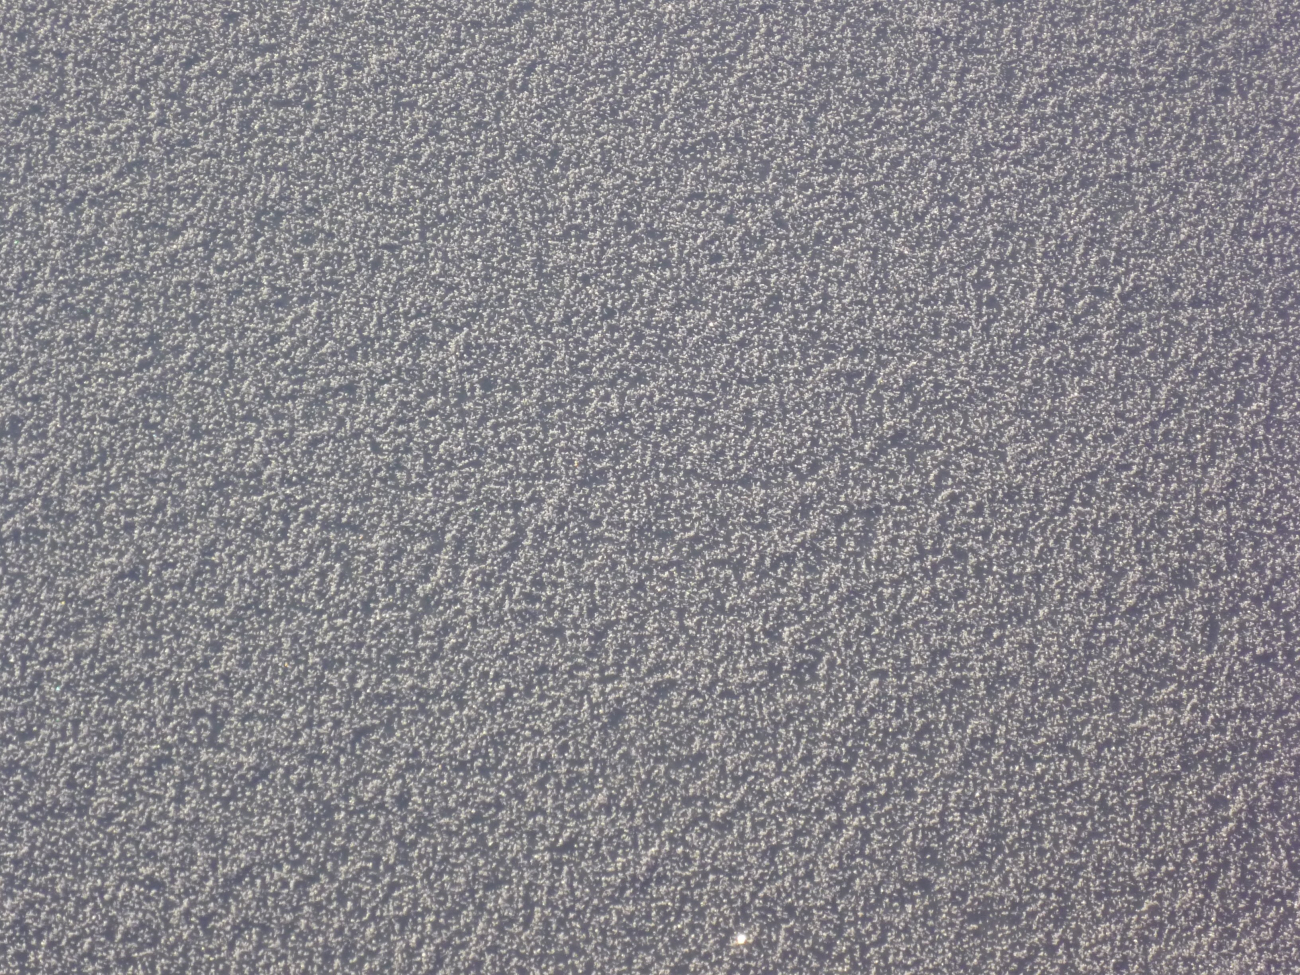 Graupel covering ice surface